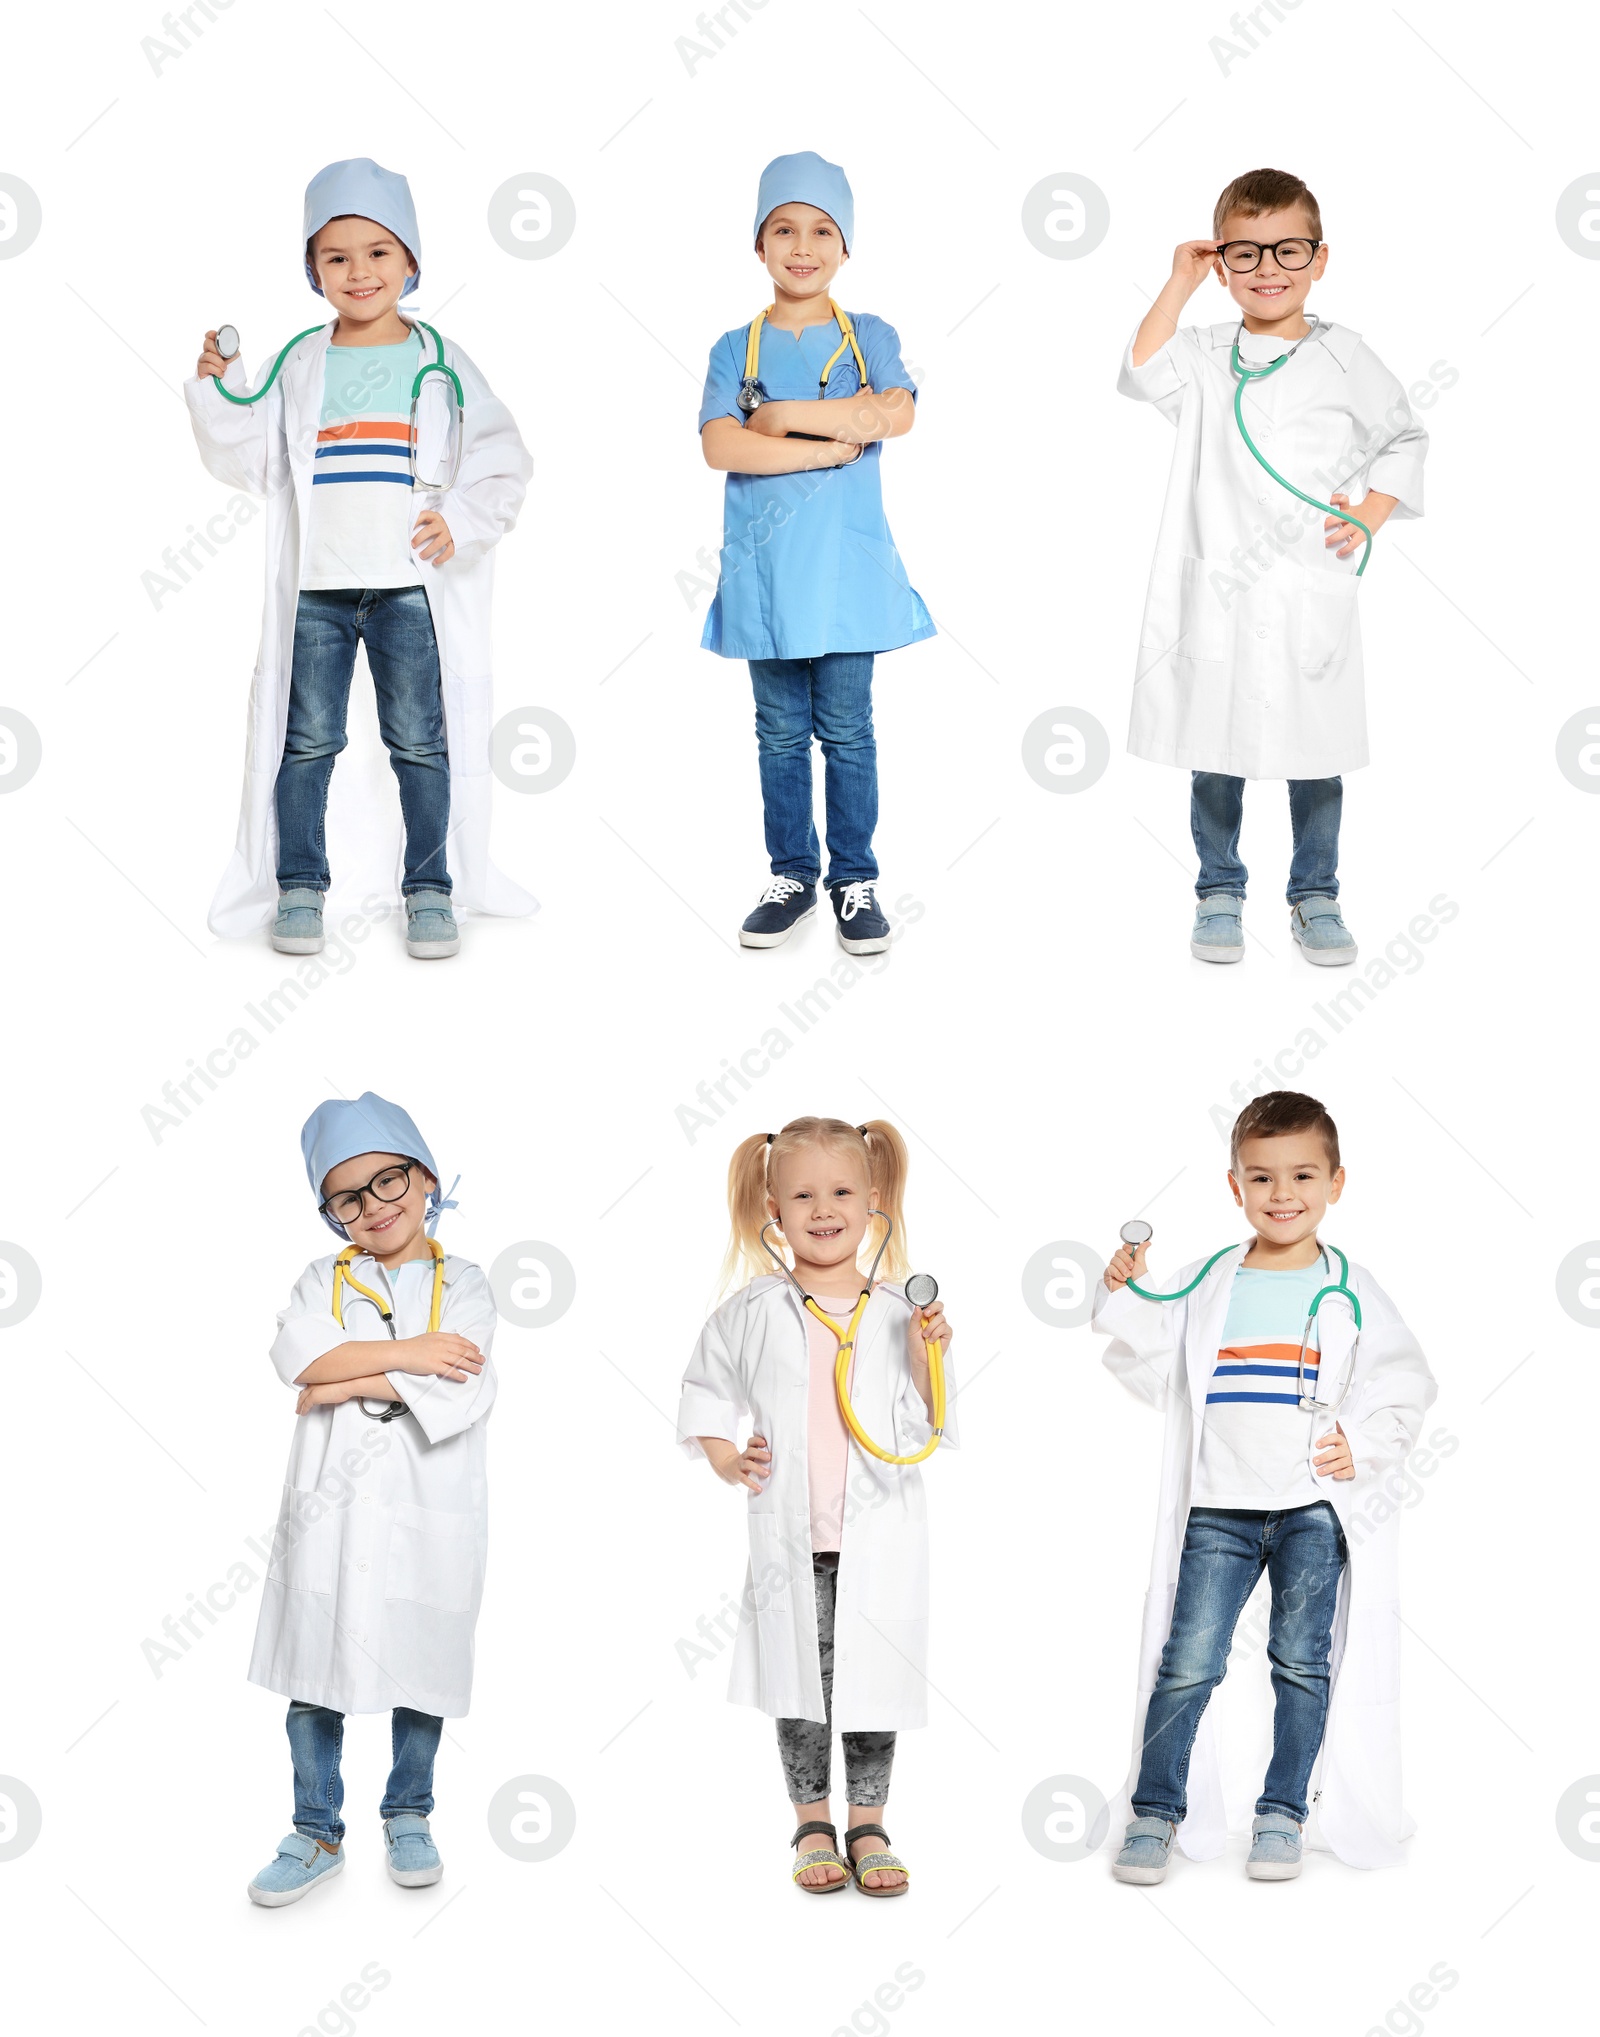 Image of Collage of cute little children wearing doctor uniform costumes playing on white background